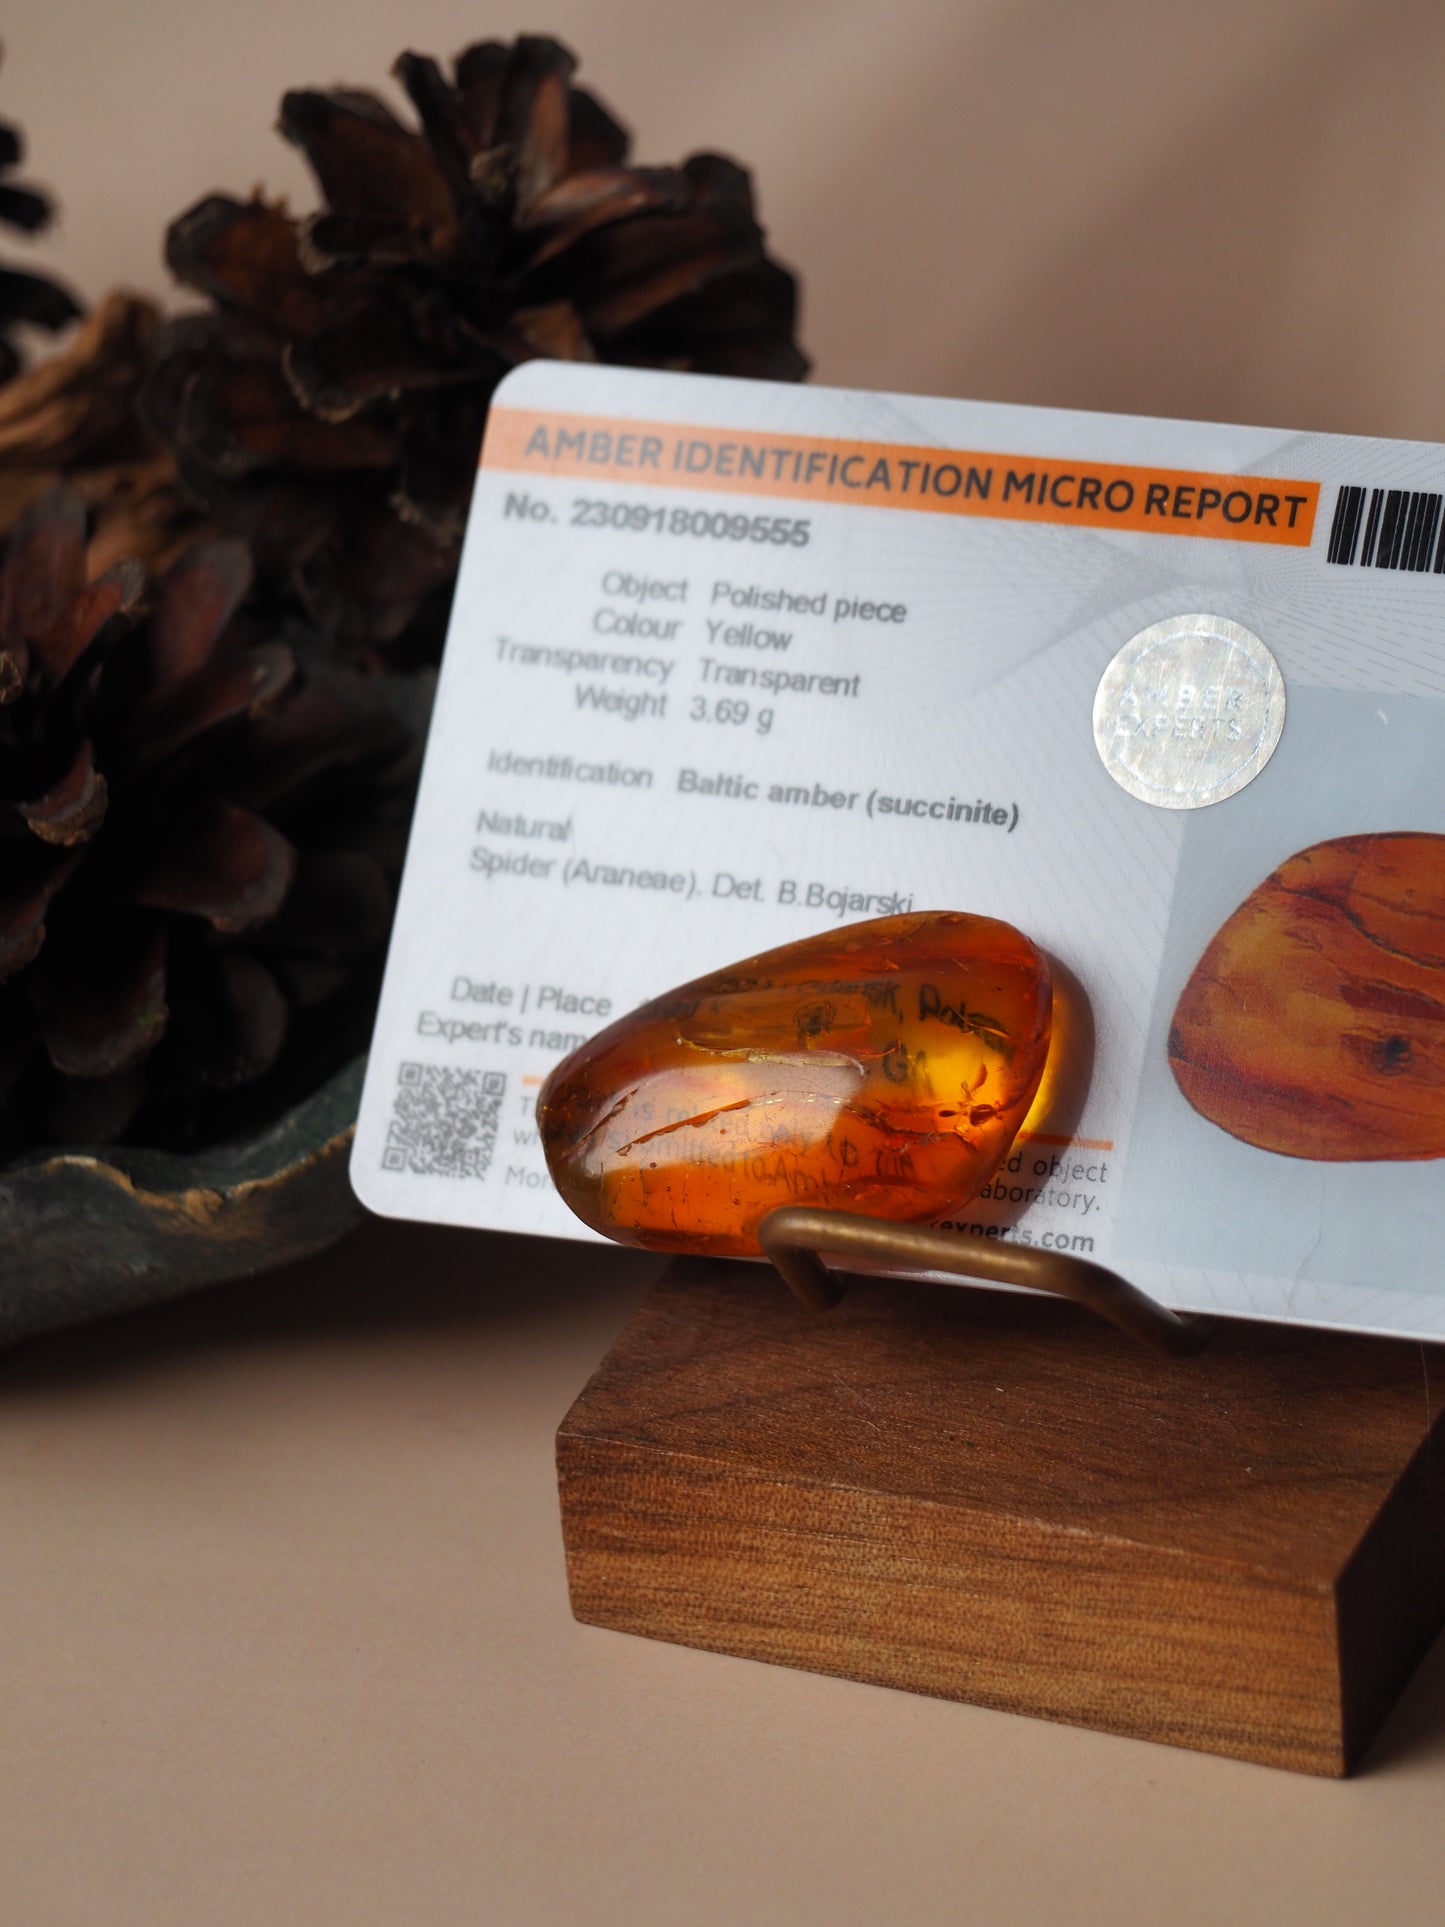 Rare Amber Piece with Natural Spider Inclusion with Certificate